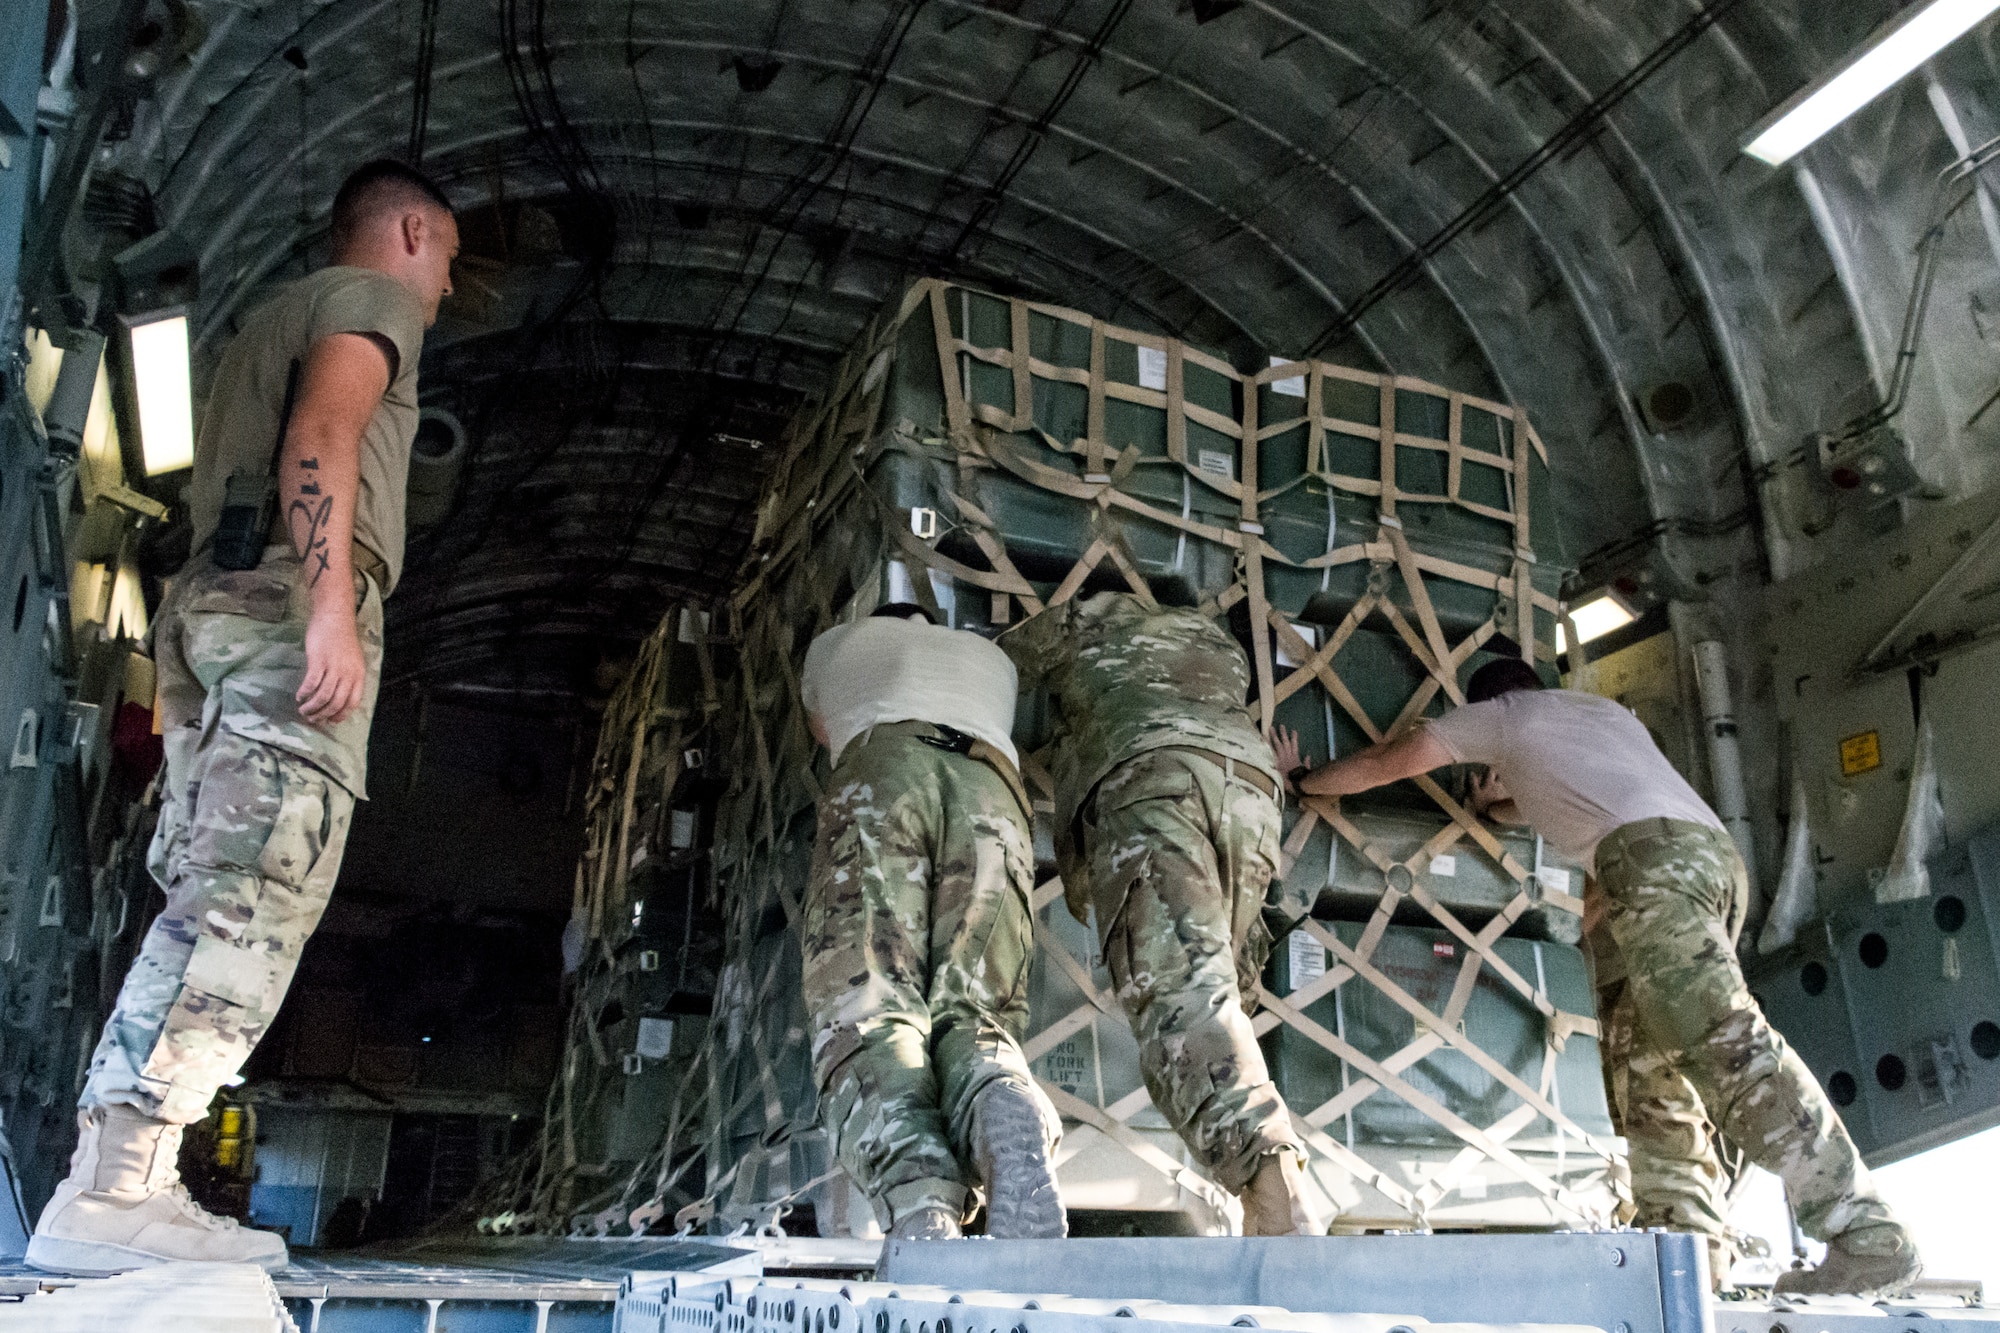 Personnel from the 816th Expeditionary Airlift Squadron and 332nd Air Expeditionary Wing load cargo on a C-17 Globemaster III at an undisclosed location in Southwest Asia after transporting cargo between U.S. Africa Command and U.S. Central Command, Aug. 28, 2018. Al Udeid-based aircraft have completed nearly 15 missions this calendar year between the two commands. (U.S. Air Force photo by Tech. Sgt. Ted Nichols/Released)